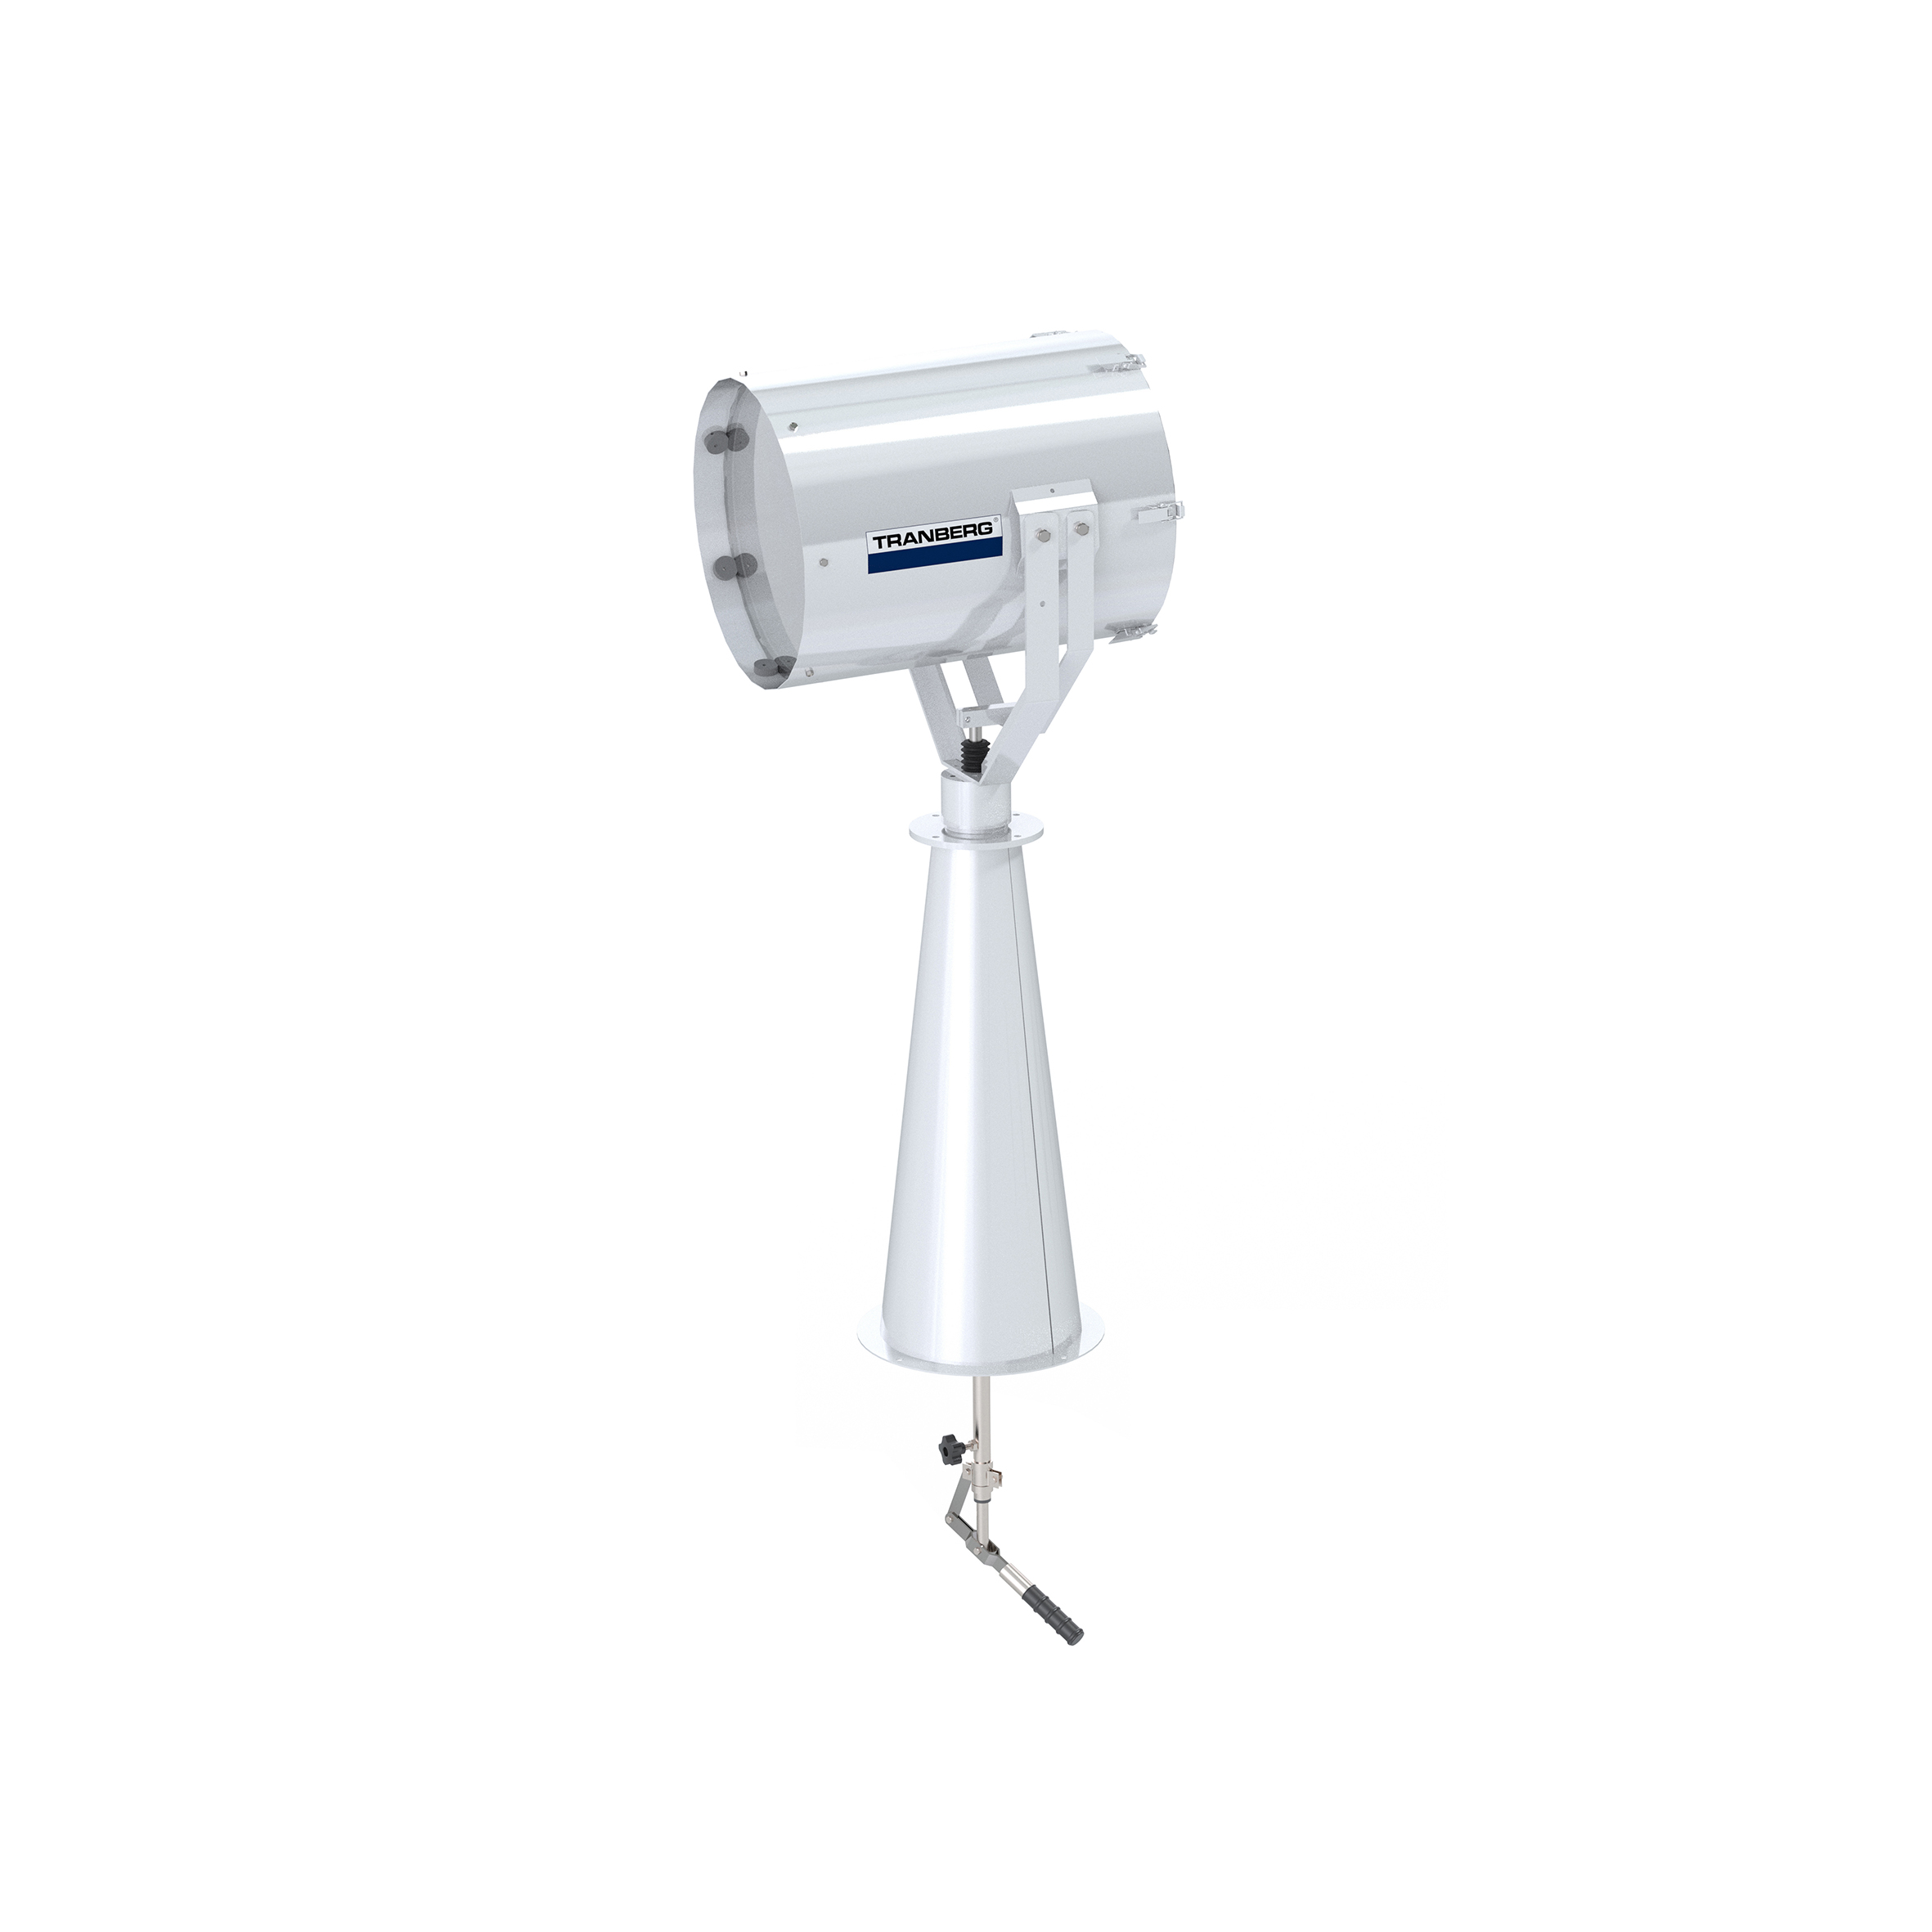 TEF 2630 Searchlight: Halogen 2000W bulb incl, 230V, Bridge Controlled, Stainless Steel, W/800 mm pe photo